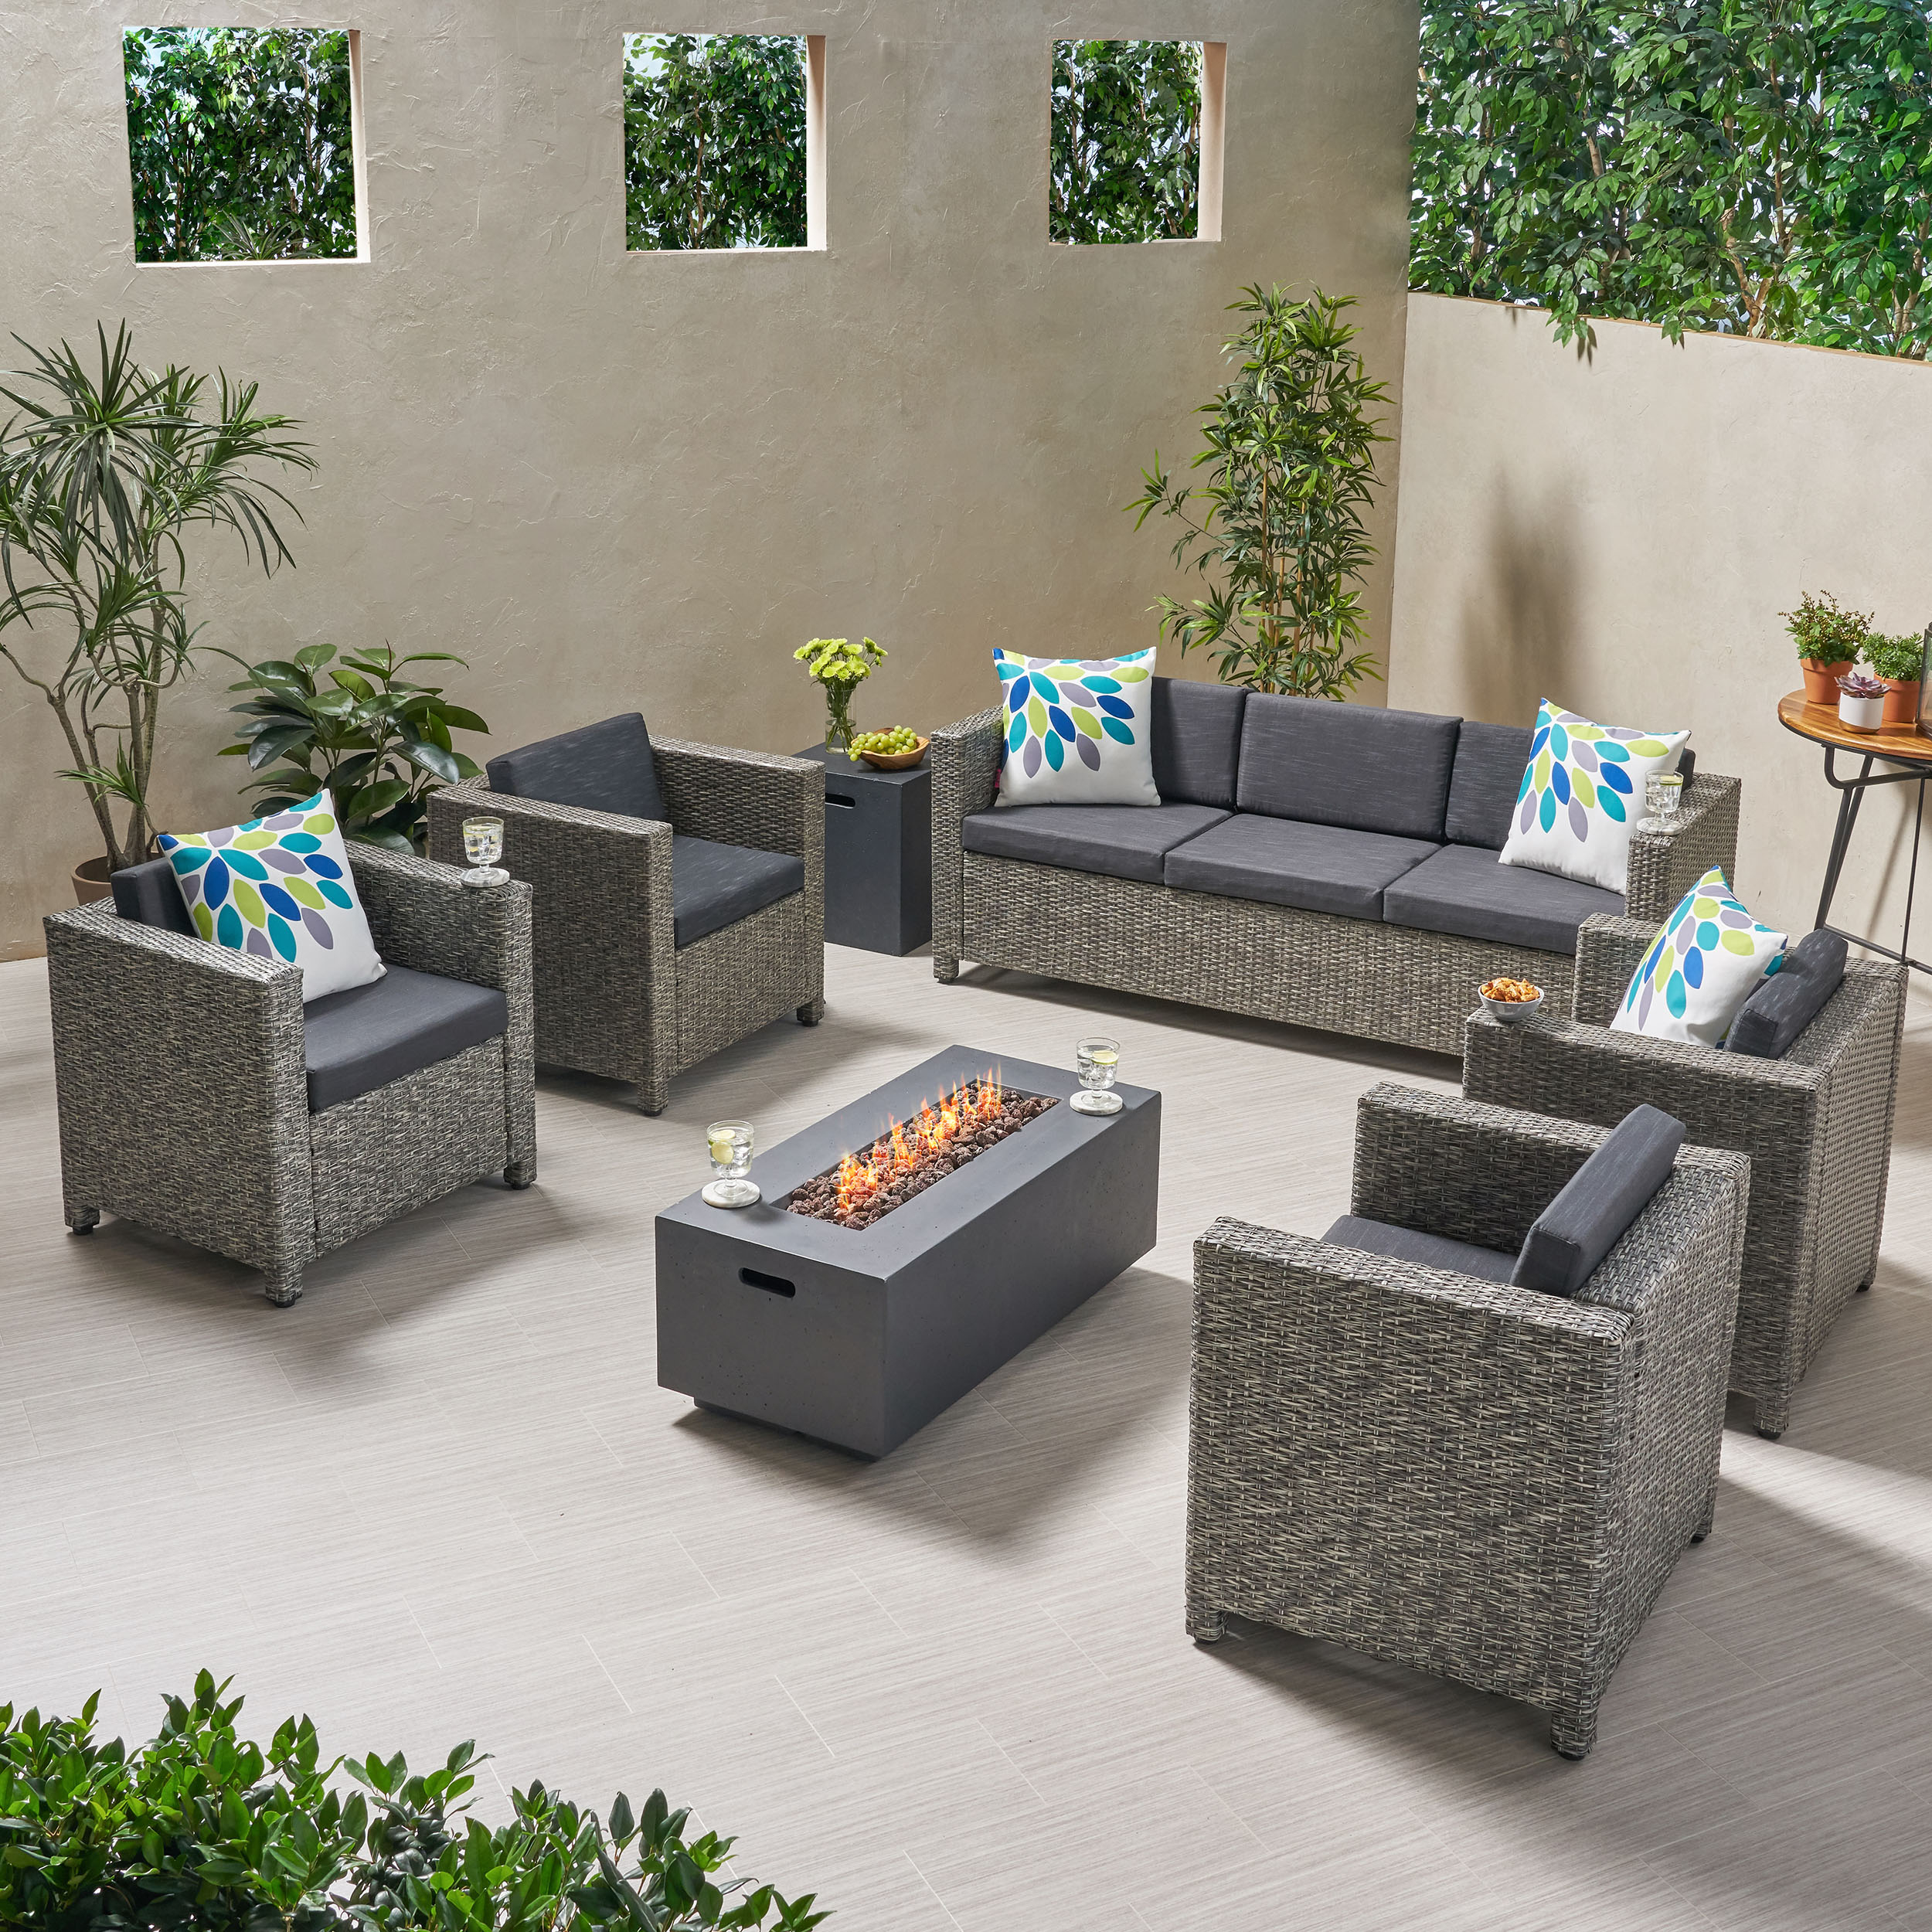 Mignon Outdoor 7 Seater Wicker Chat Set with Fire Pit - mix black + dark gray